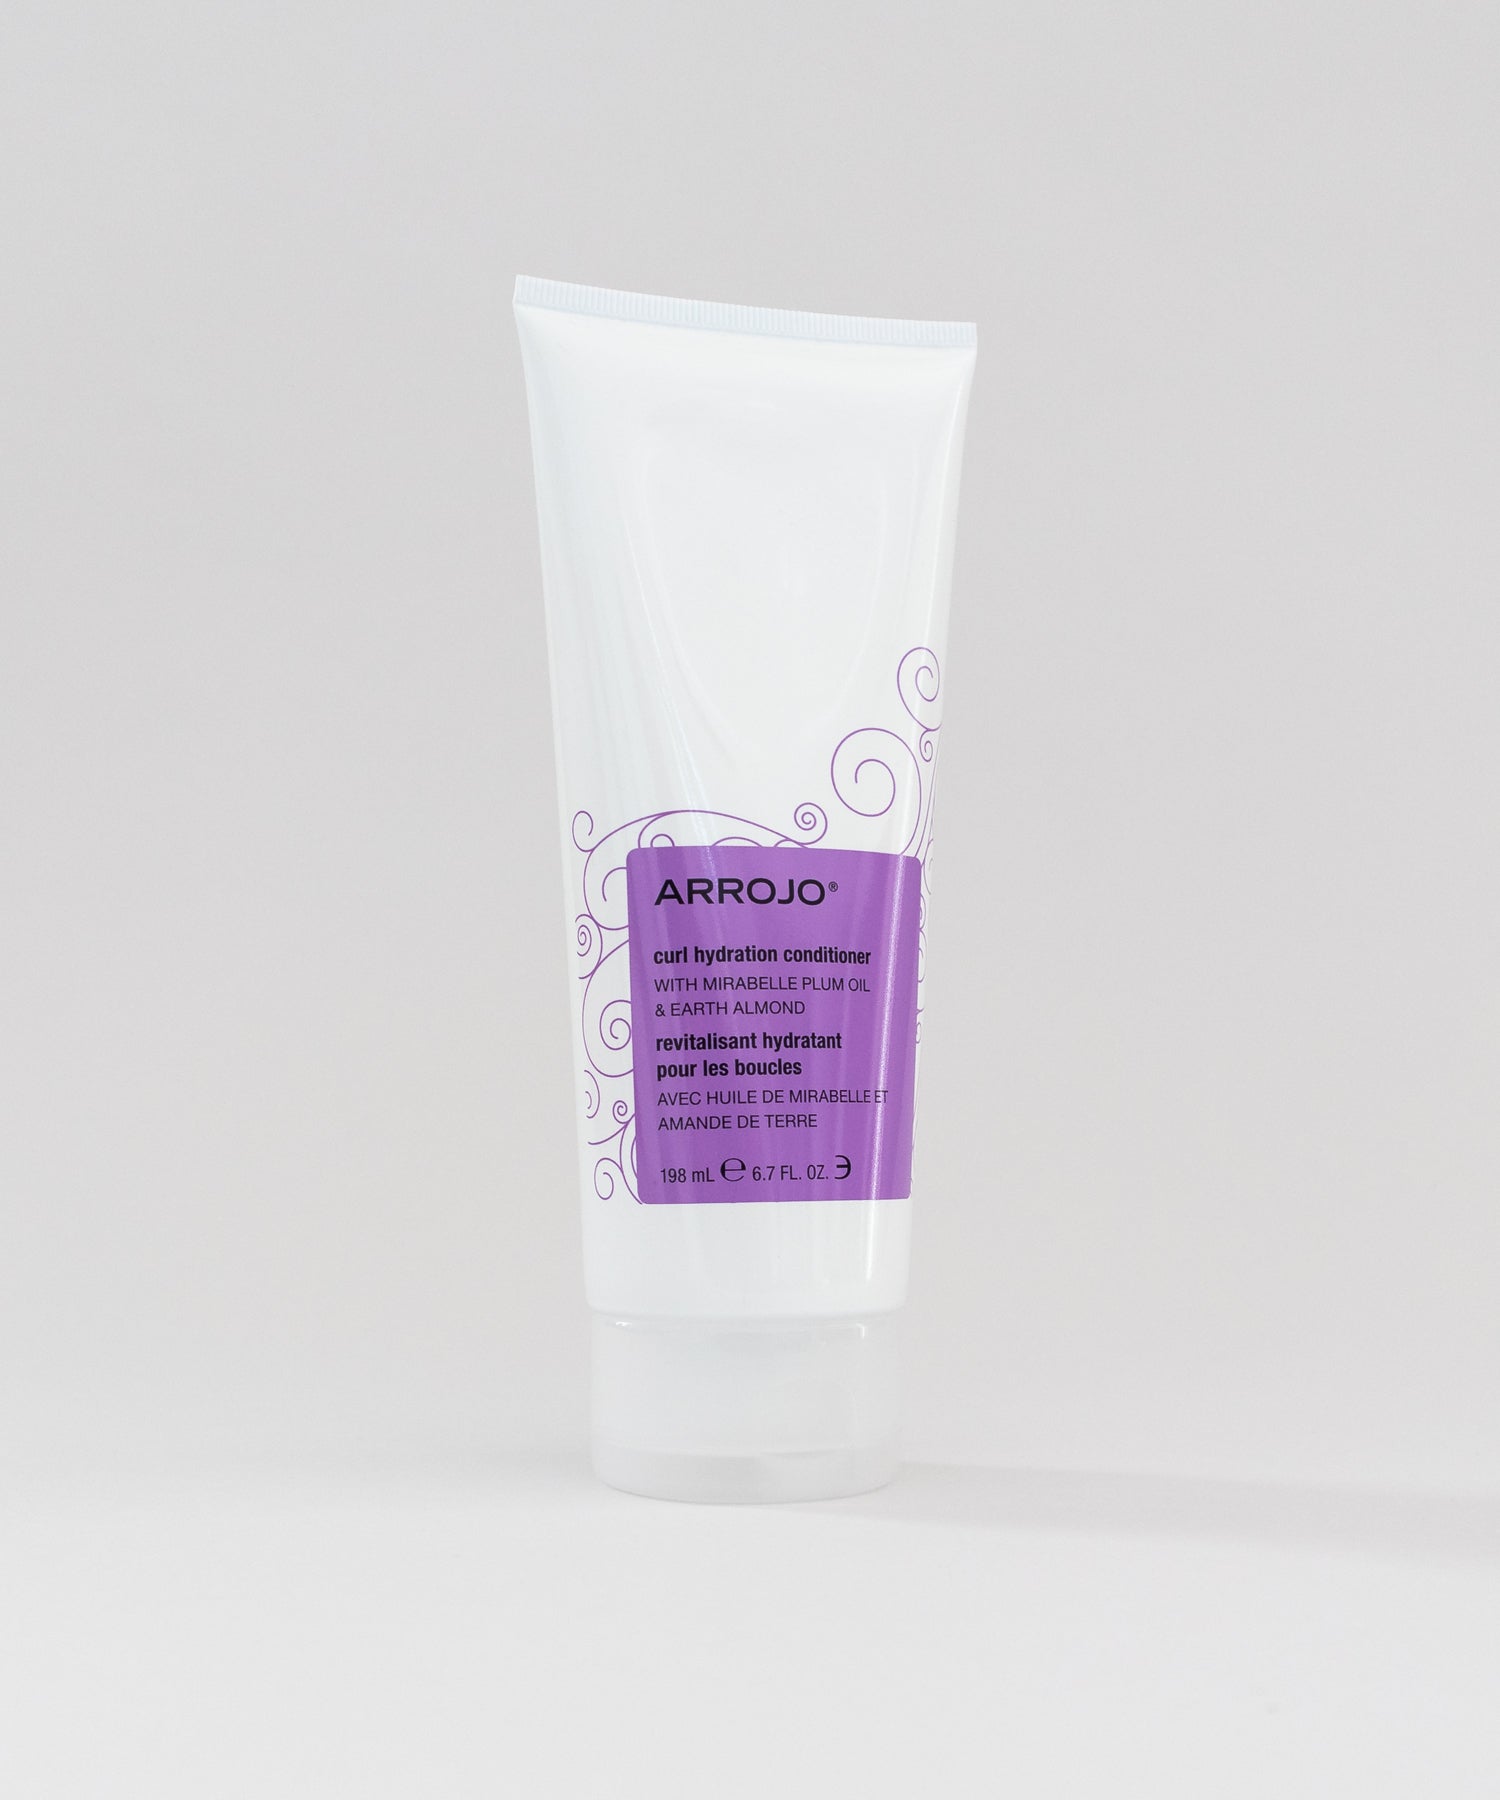 Arrojo specialty conditioner for curly, dry, or frizzy hair. 